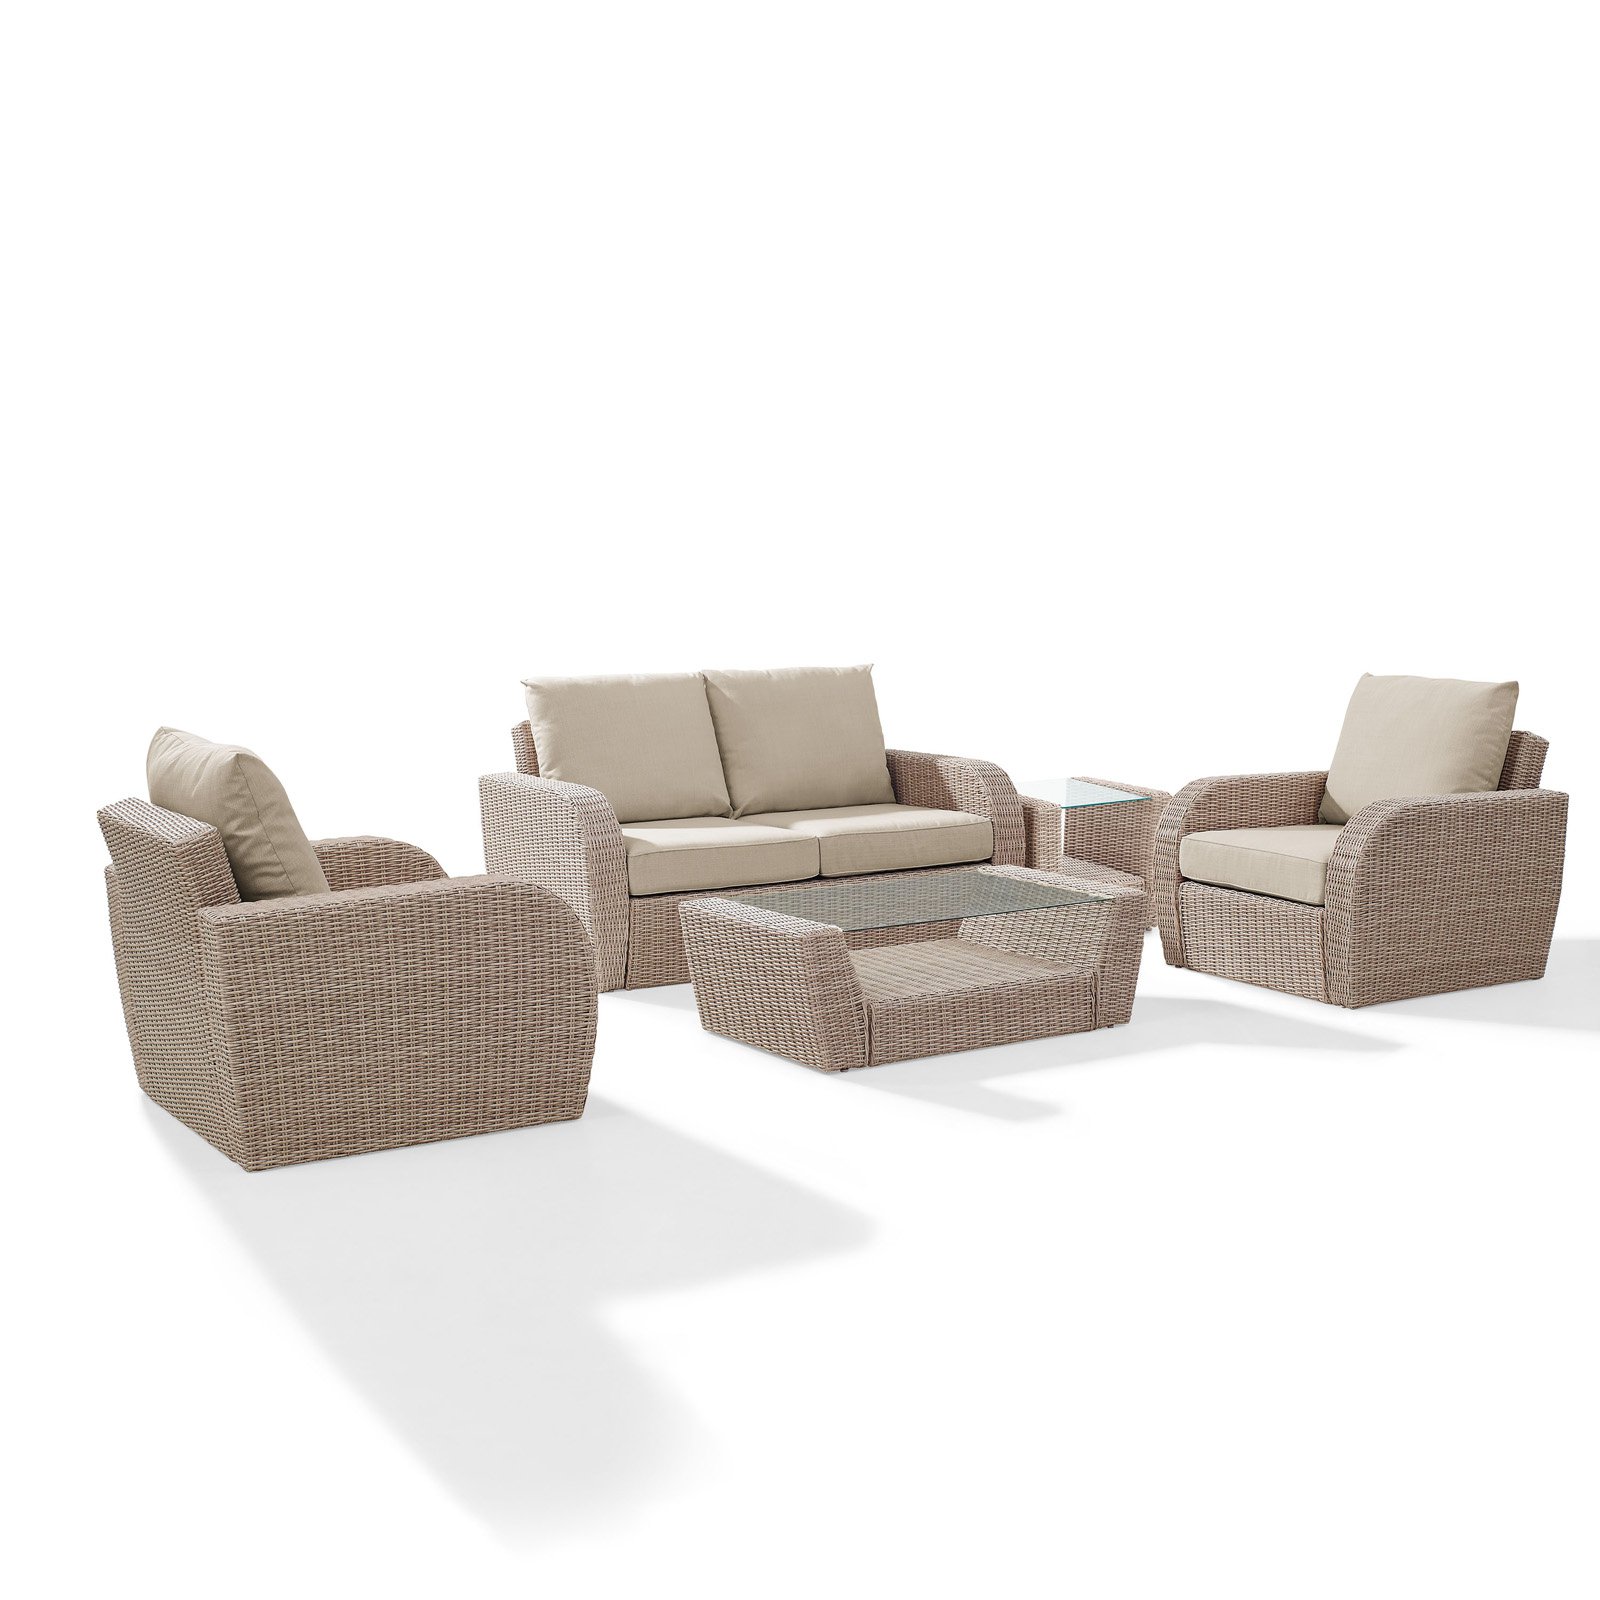 Crosley Furniture St Augustine 5 Pc Outdoor Wicker Seating Set With Oatmeal Cushion - Loveseat, Two Chairs, Coffee Table, Side Table - image 1 of 11